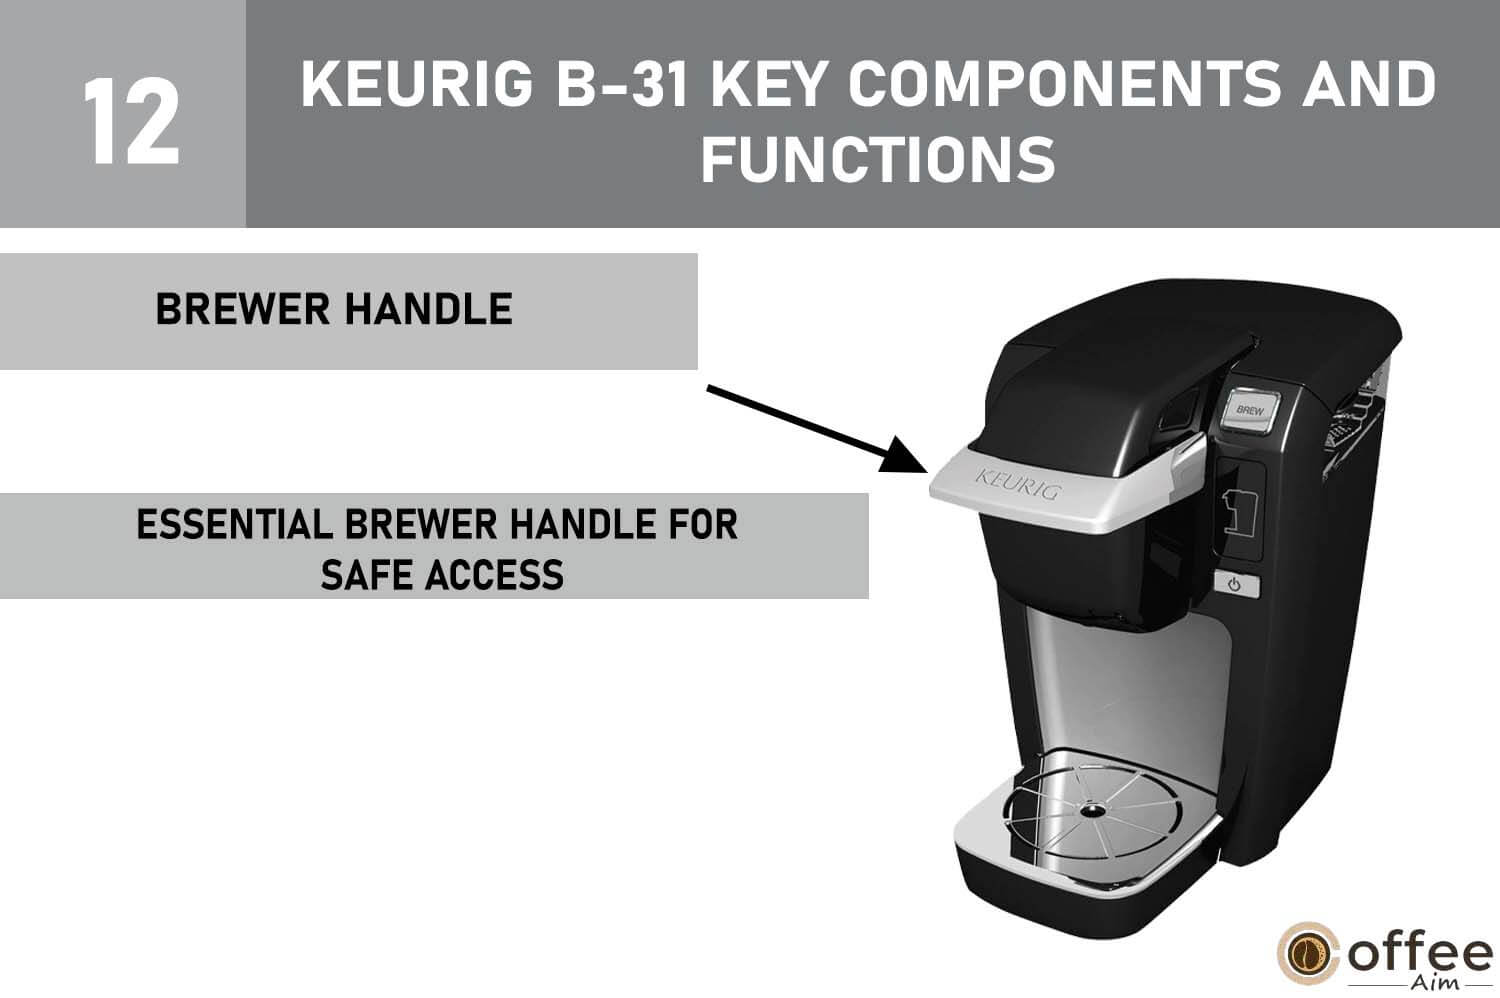 This image illustrates the component labeled as the 'Brewer Handle' on the coffee maker model 'Keurig B-31' within the context of the article 'How To Use Keurig B-31'.